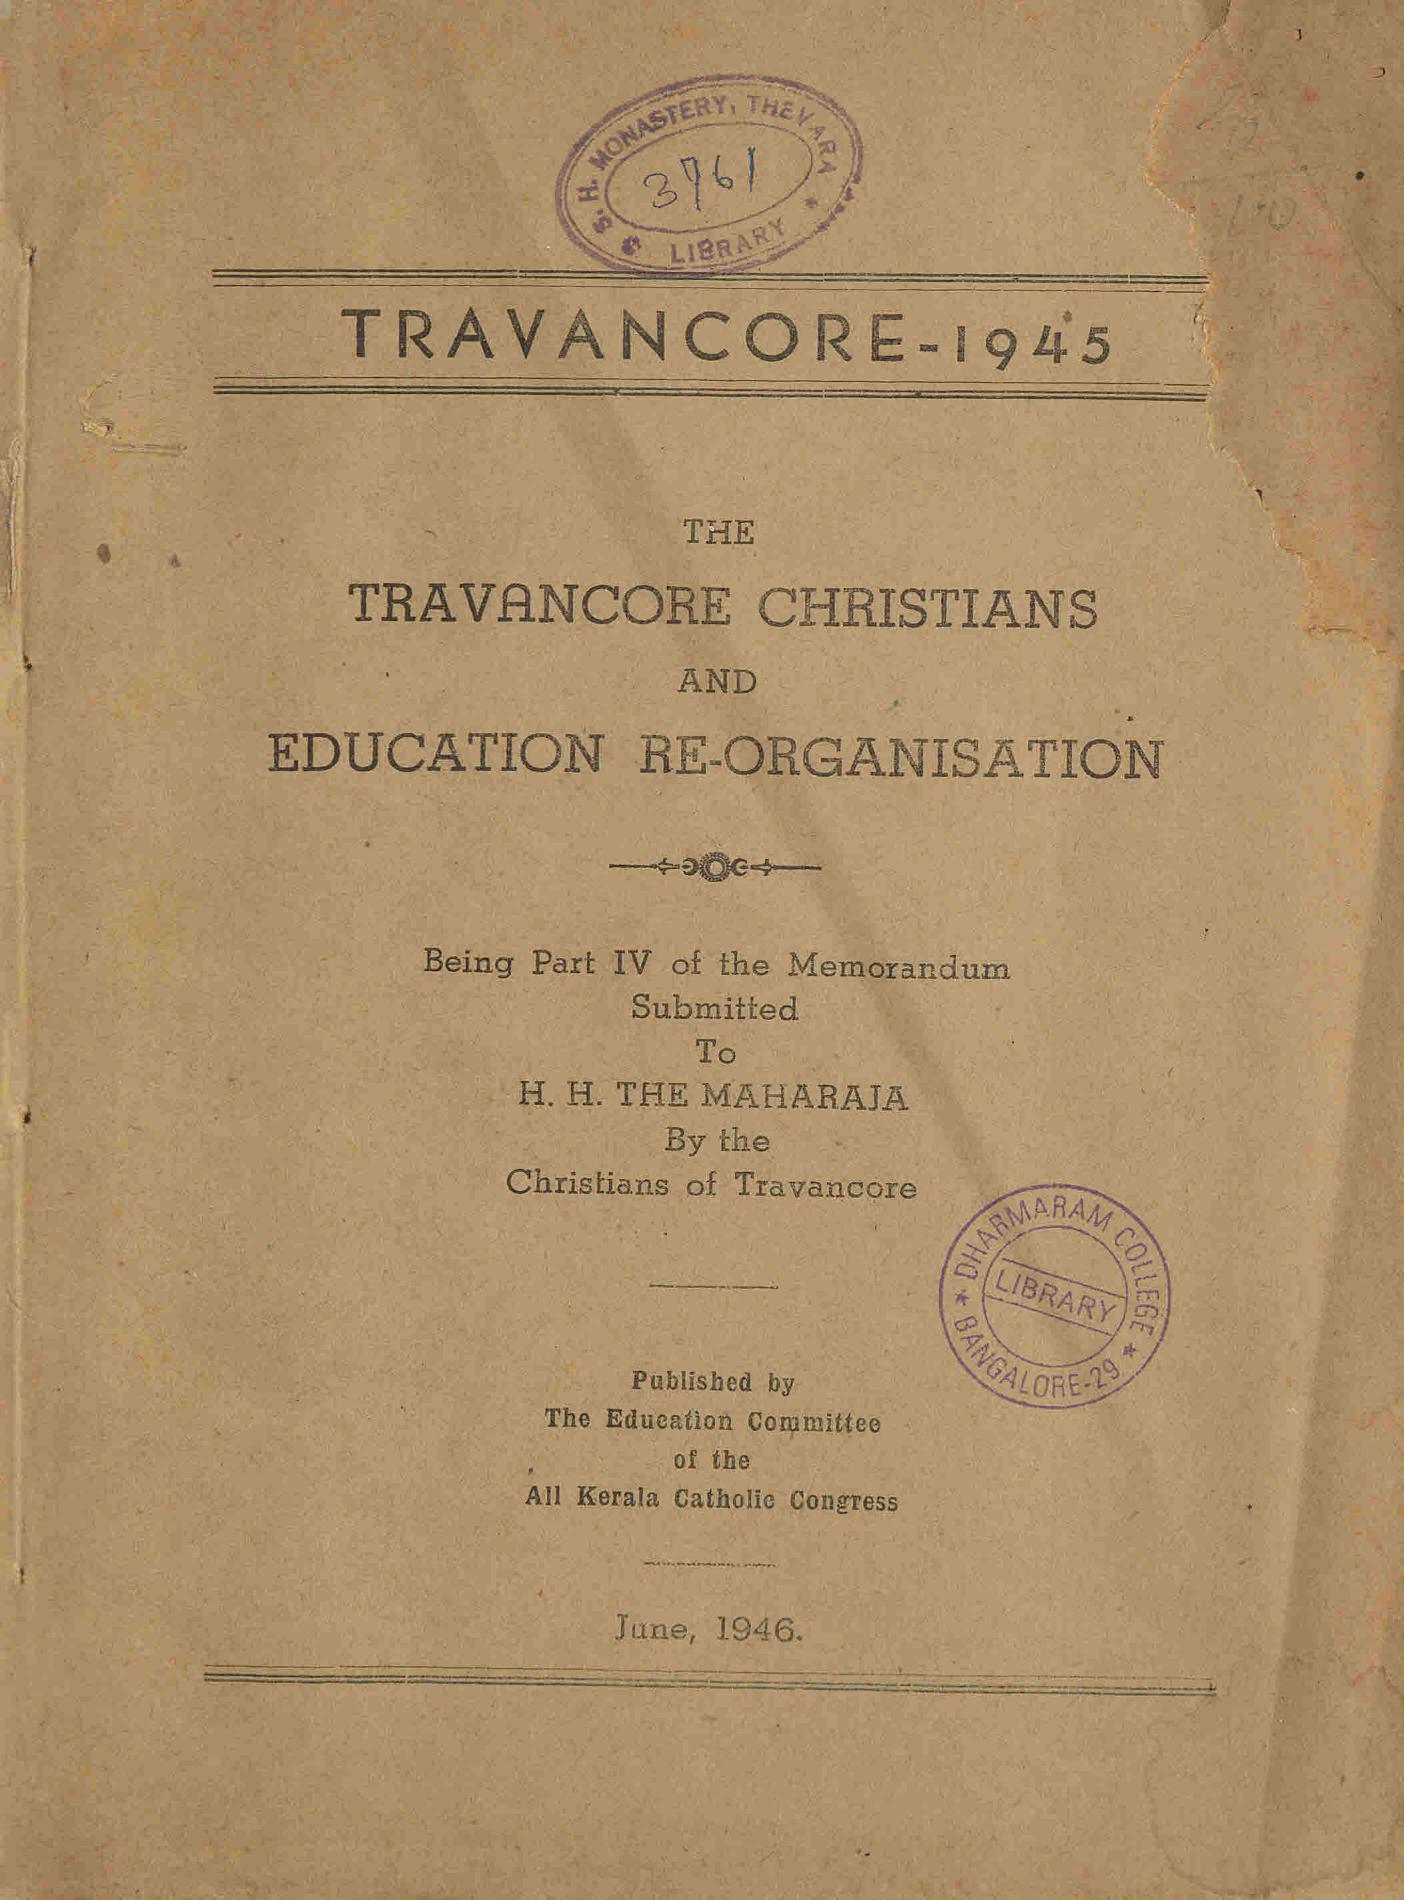  1946 - The Travancore Christians and Education Re-Organisation